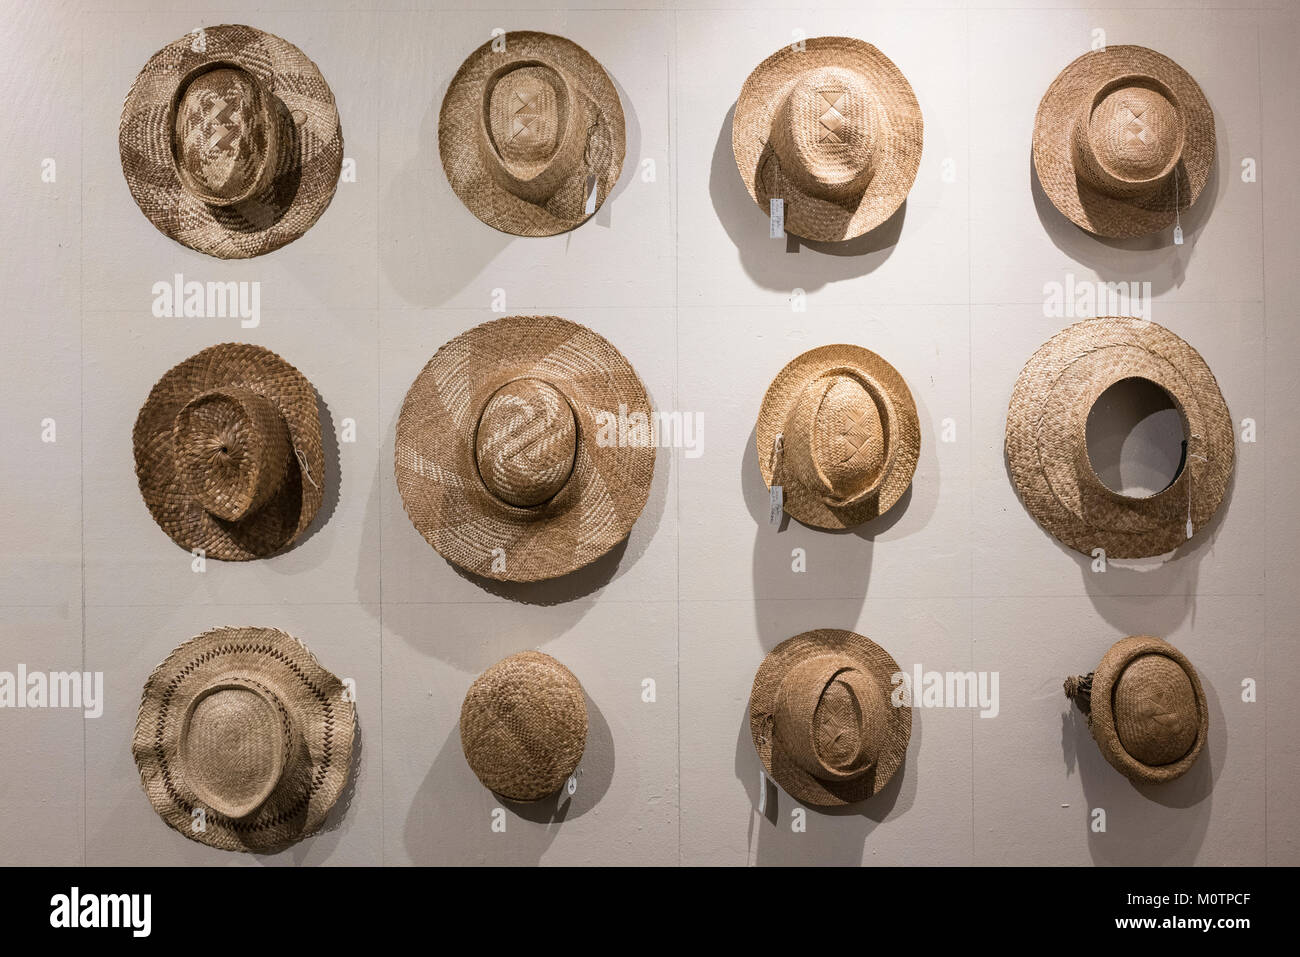 Hand made lauhala hats on display in Hawaii as art objects Stock Photo